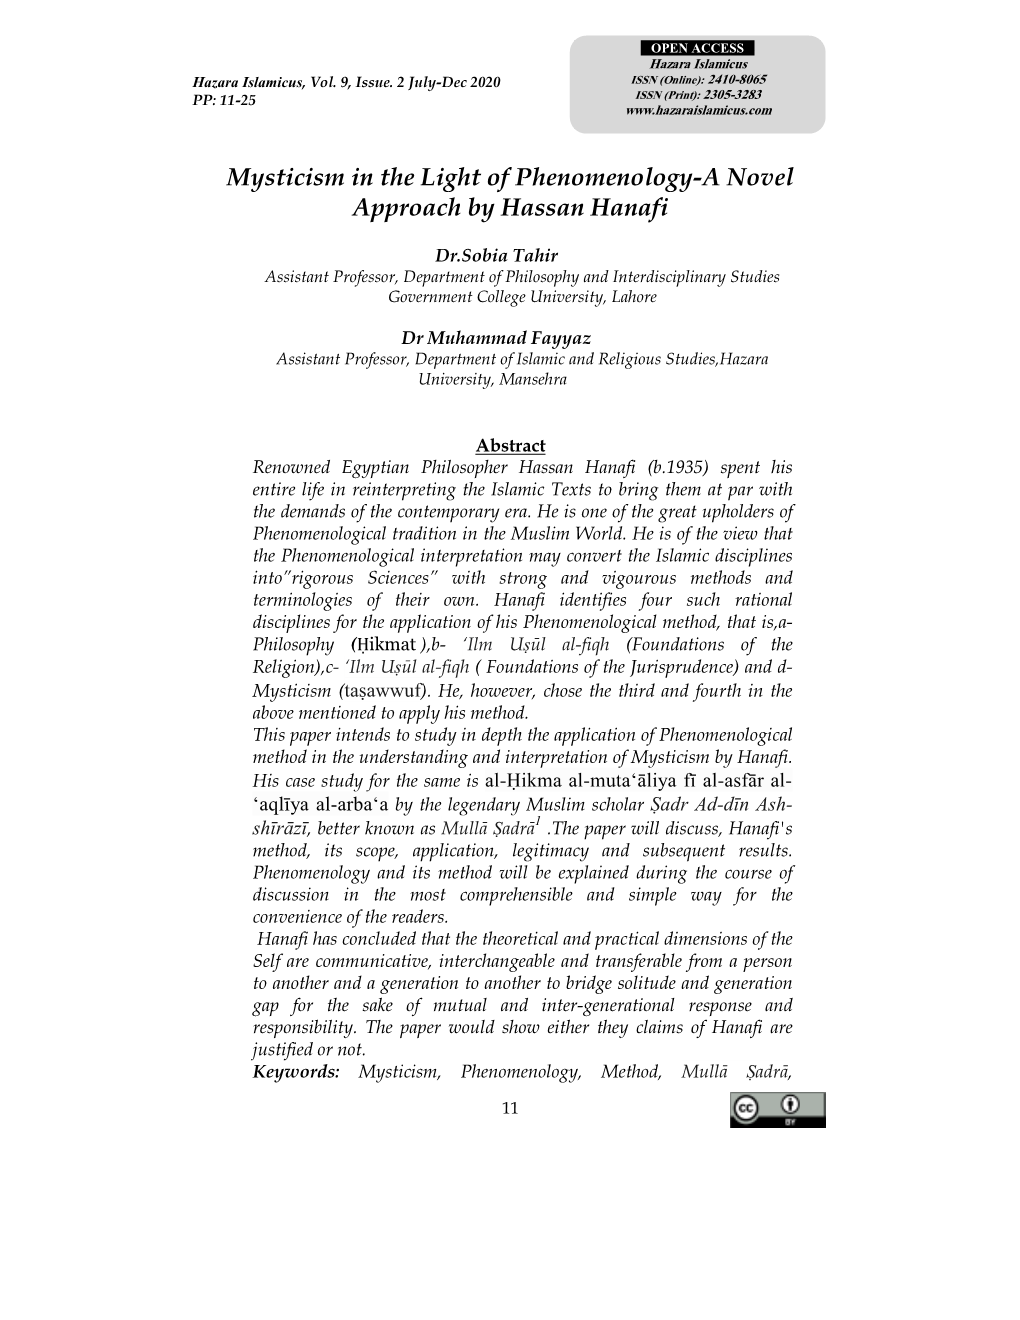 Mysticism in the Light of Phenomenology-A Novel Approach by Hassan Hanafi